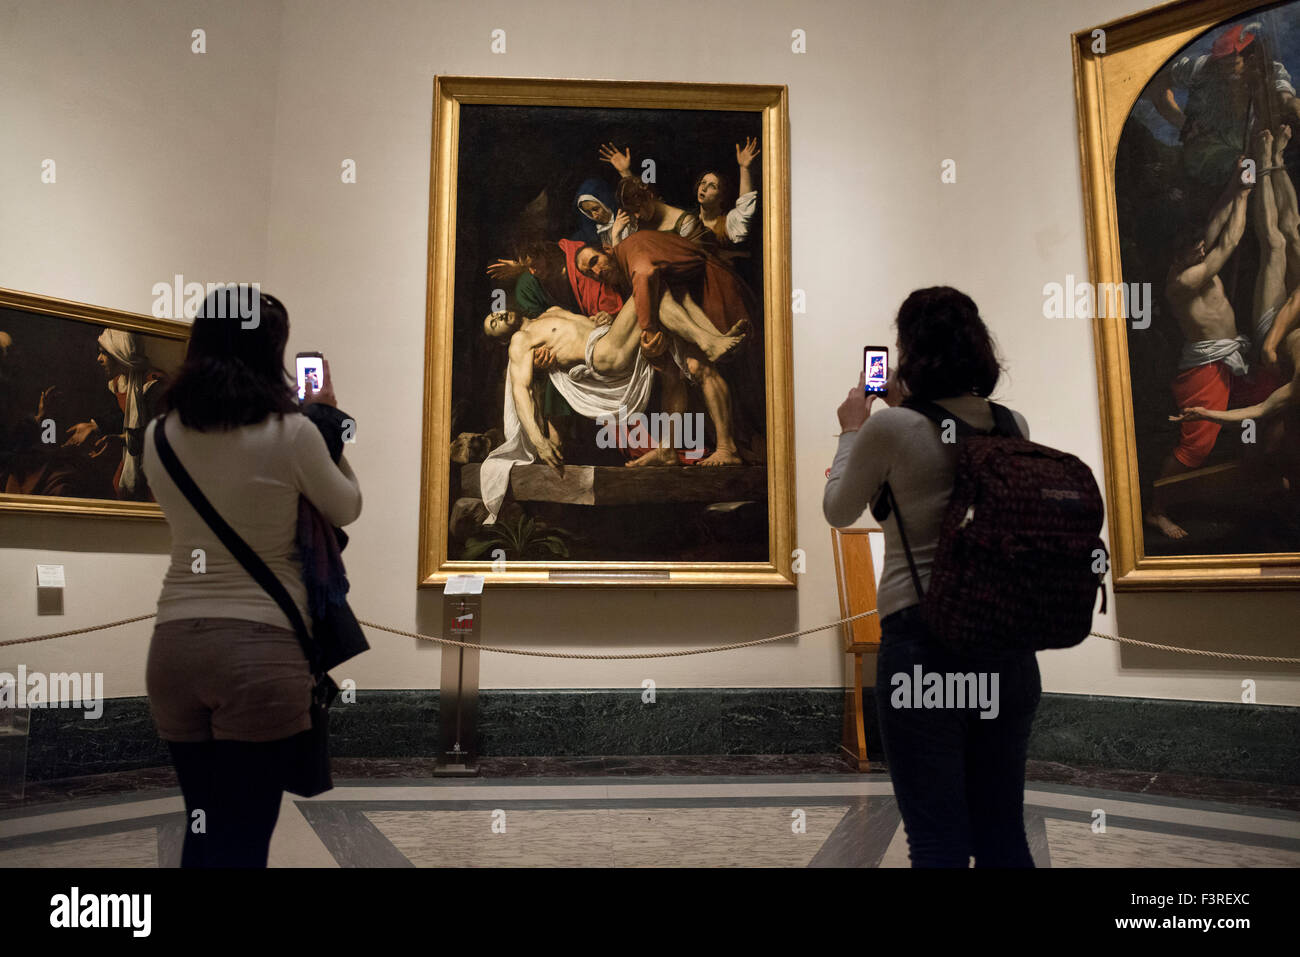 Rome. Italy. Tourists admiring Caravaggio's Deposition (1600 - 1604) in the Pinacoteca of the Vatican Museums. Musei Vaticani. Stock Photo